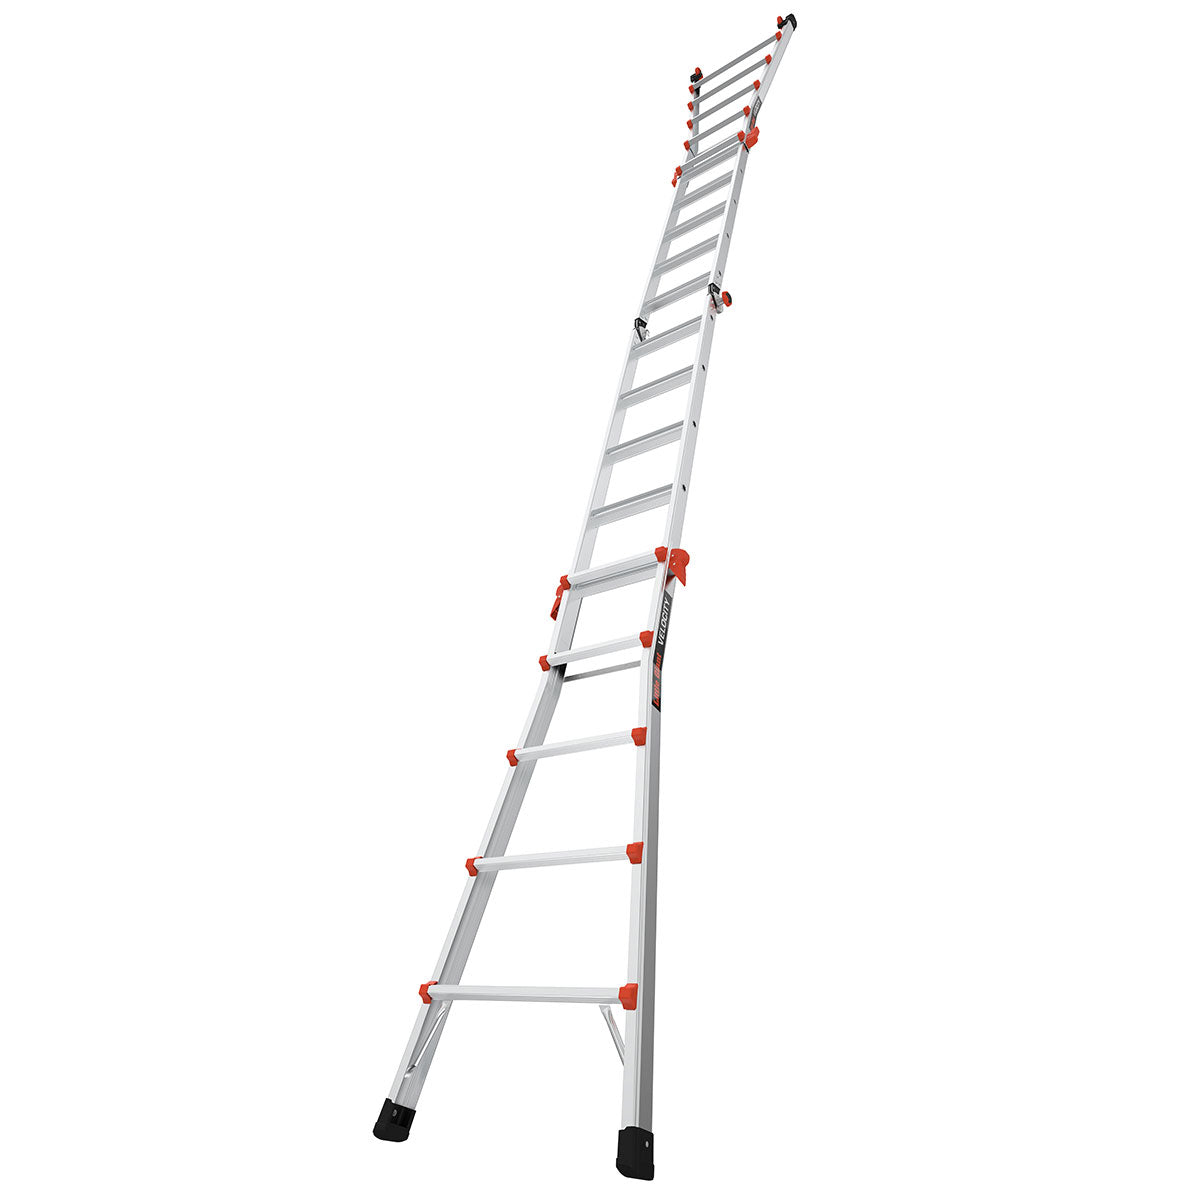 Little Giant 15422-303 - VELOCITY, Model 22 - CSA Grade IA - 300 lb/136 kg Rated, Aluminum Articulated Extendable Ladder